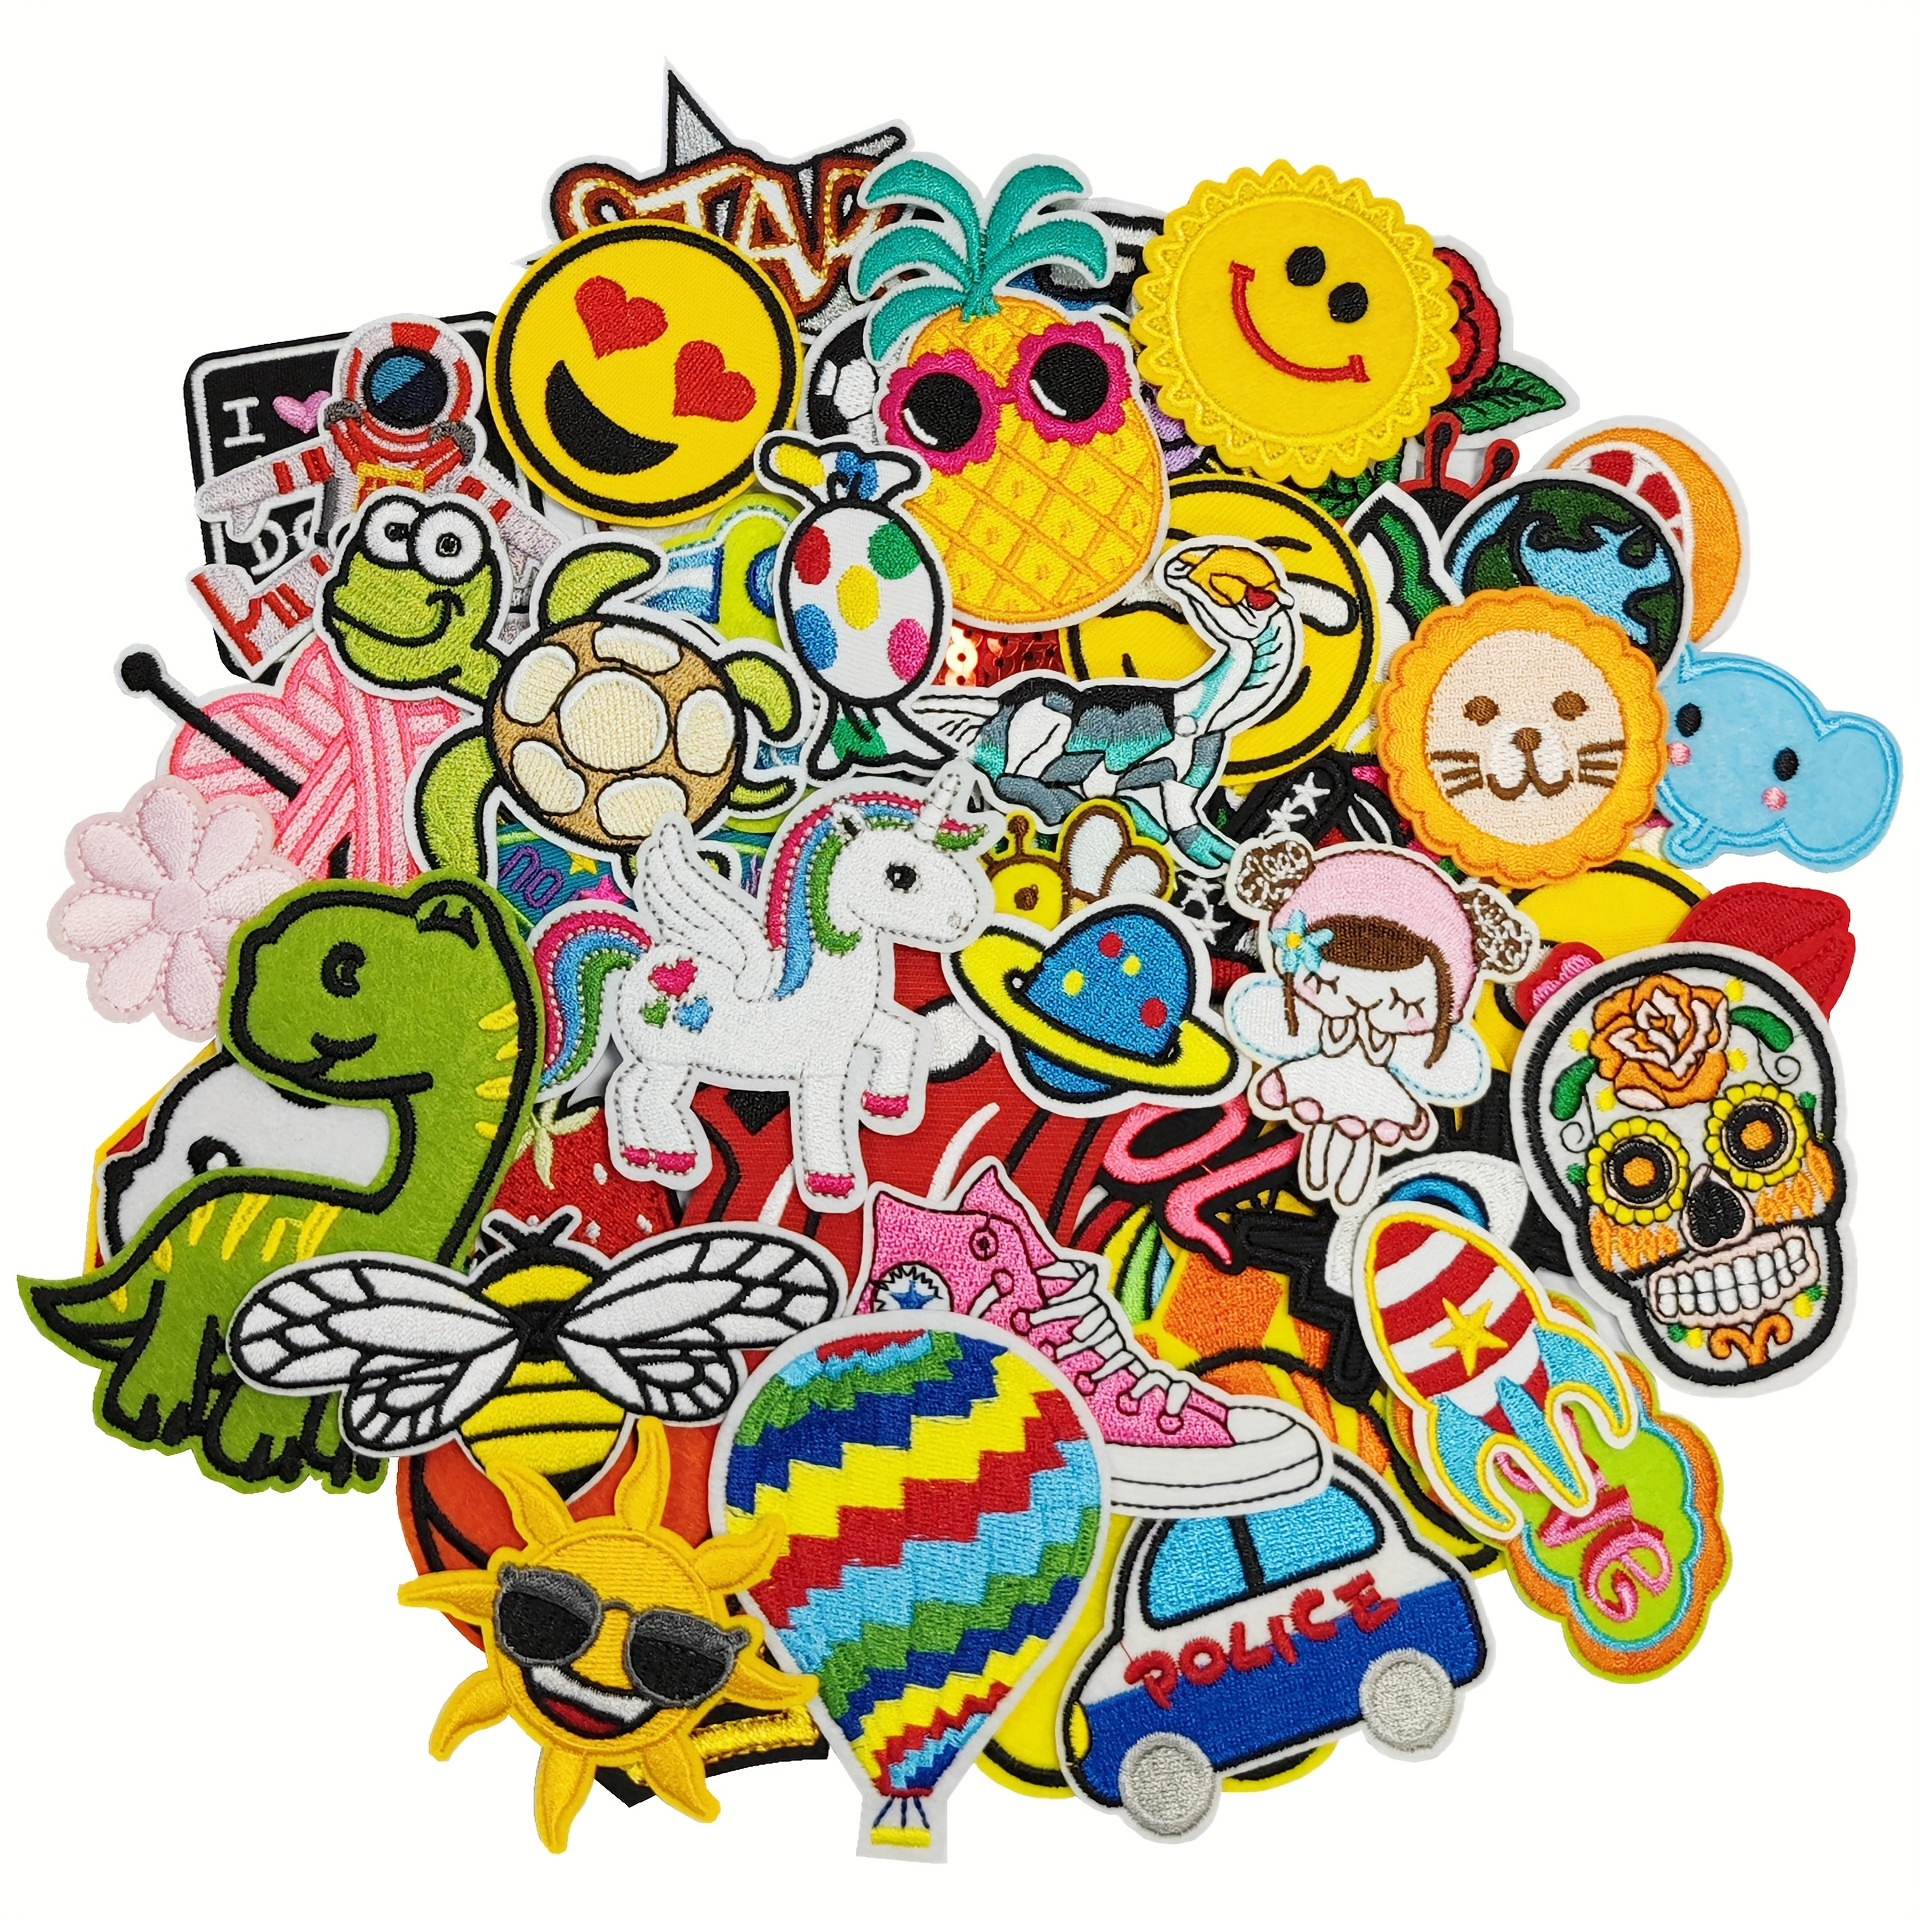 

60-piece Mixed Design Iron-on/sew-on Patches - Cartoon, Fruit, Floral & Animal Embroidery Appliques For Clothing, Bags & Diy Crafts Embroidered Patches Embroidery Kit